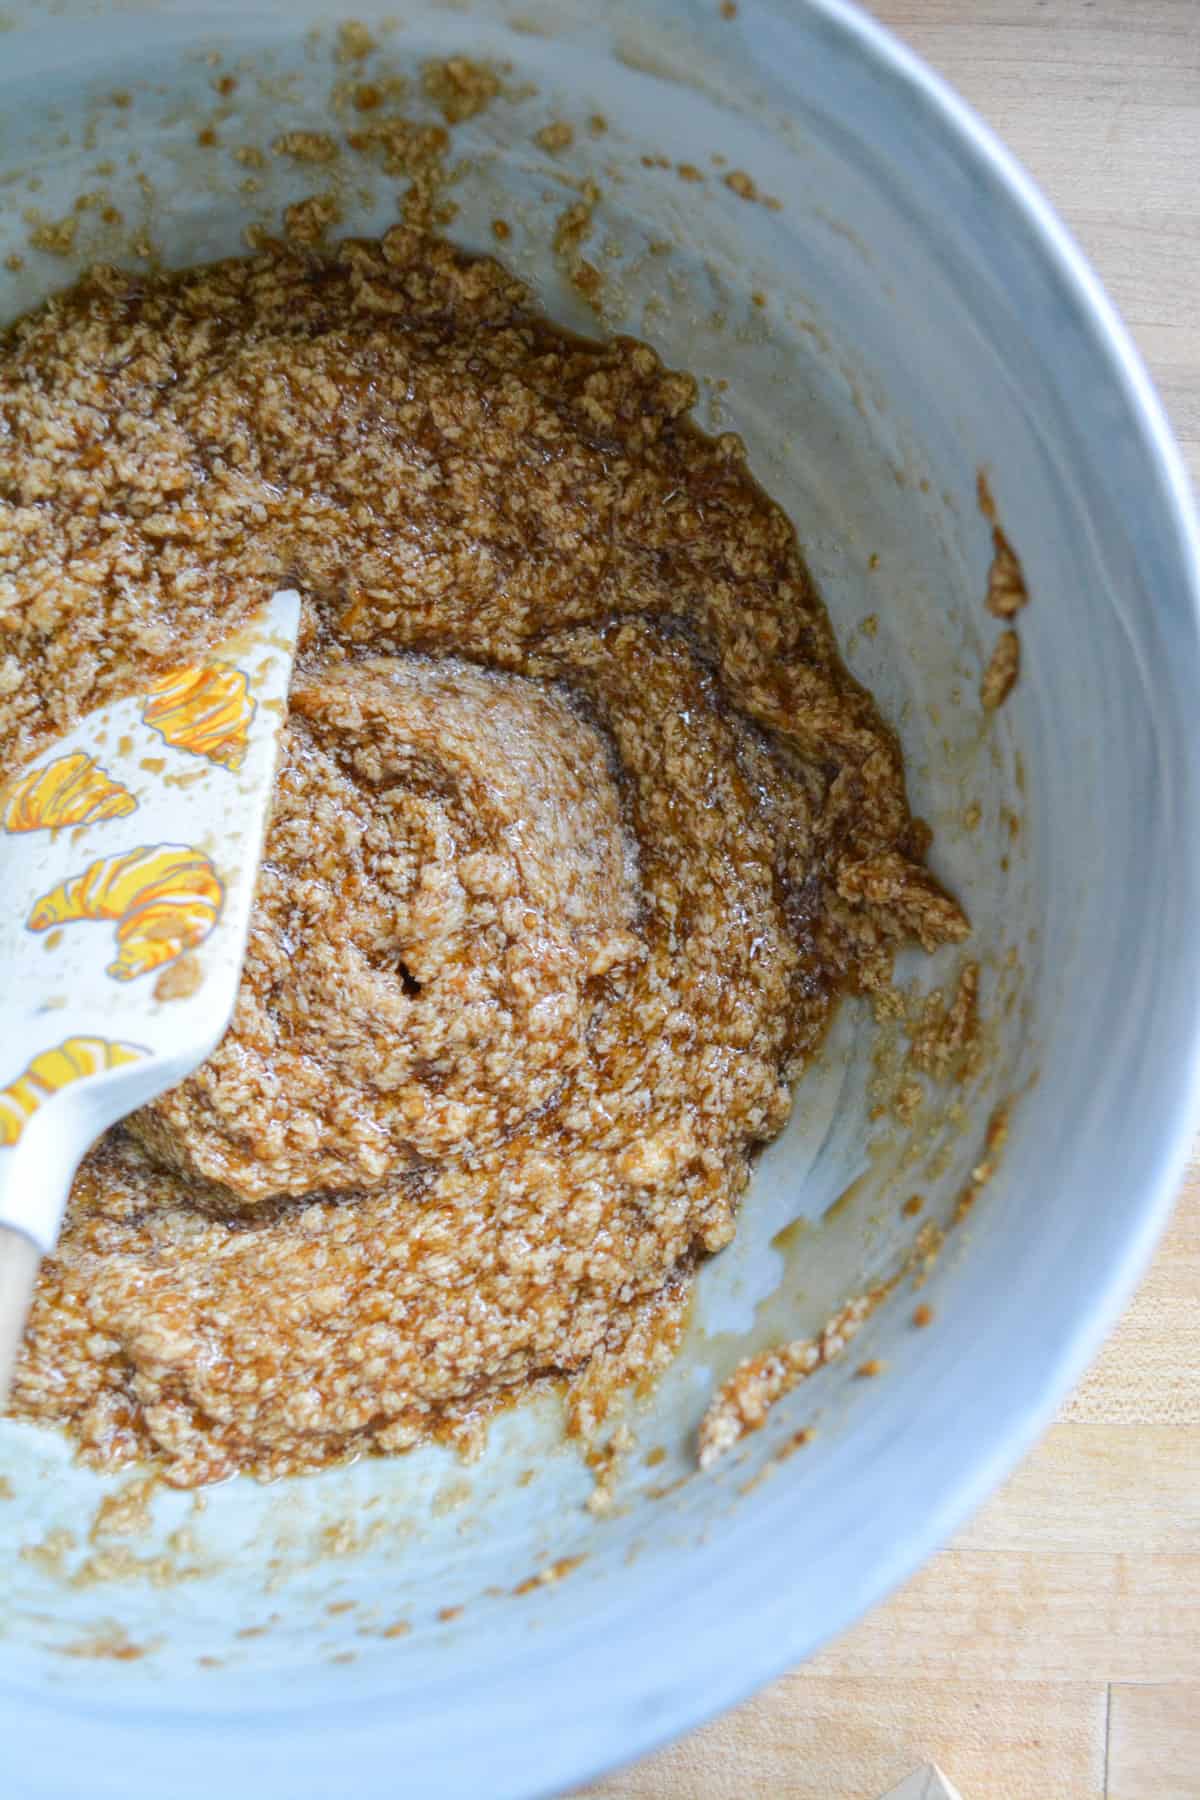 Flax egg added into mixing bowl